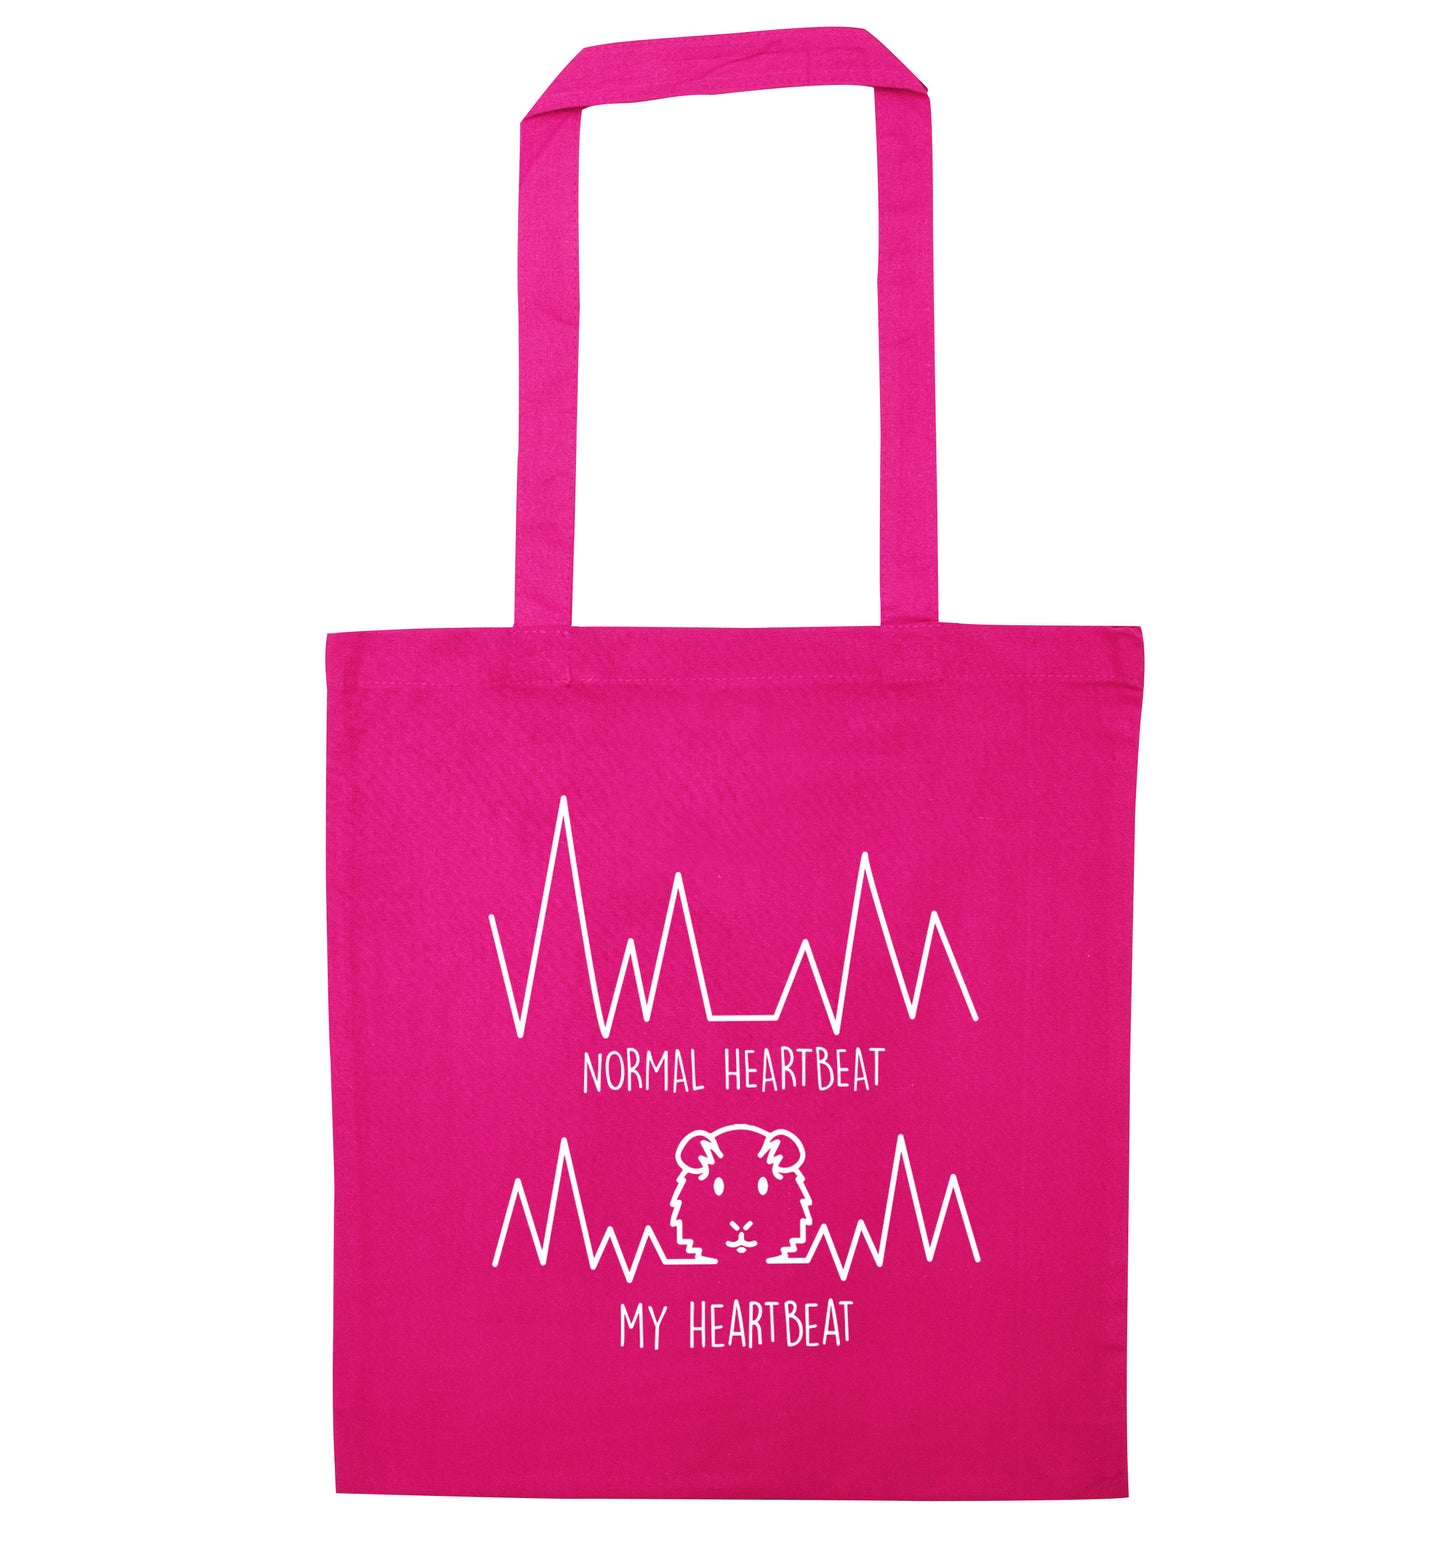 Normal heartbeat vs my heartbeat guinea pig lover pink tote bag